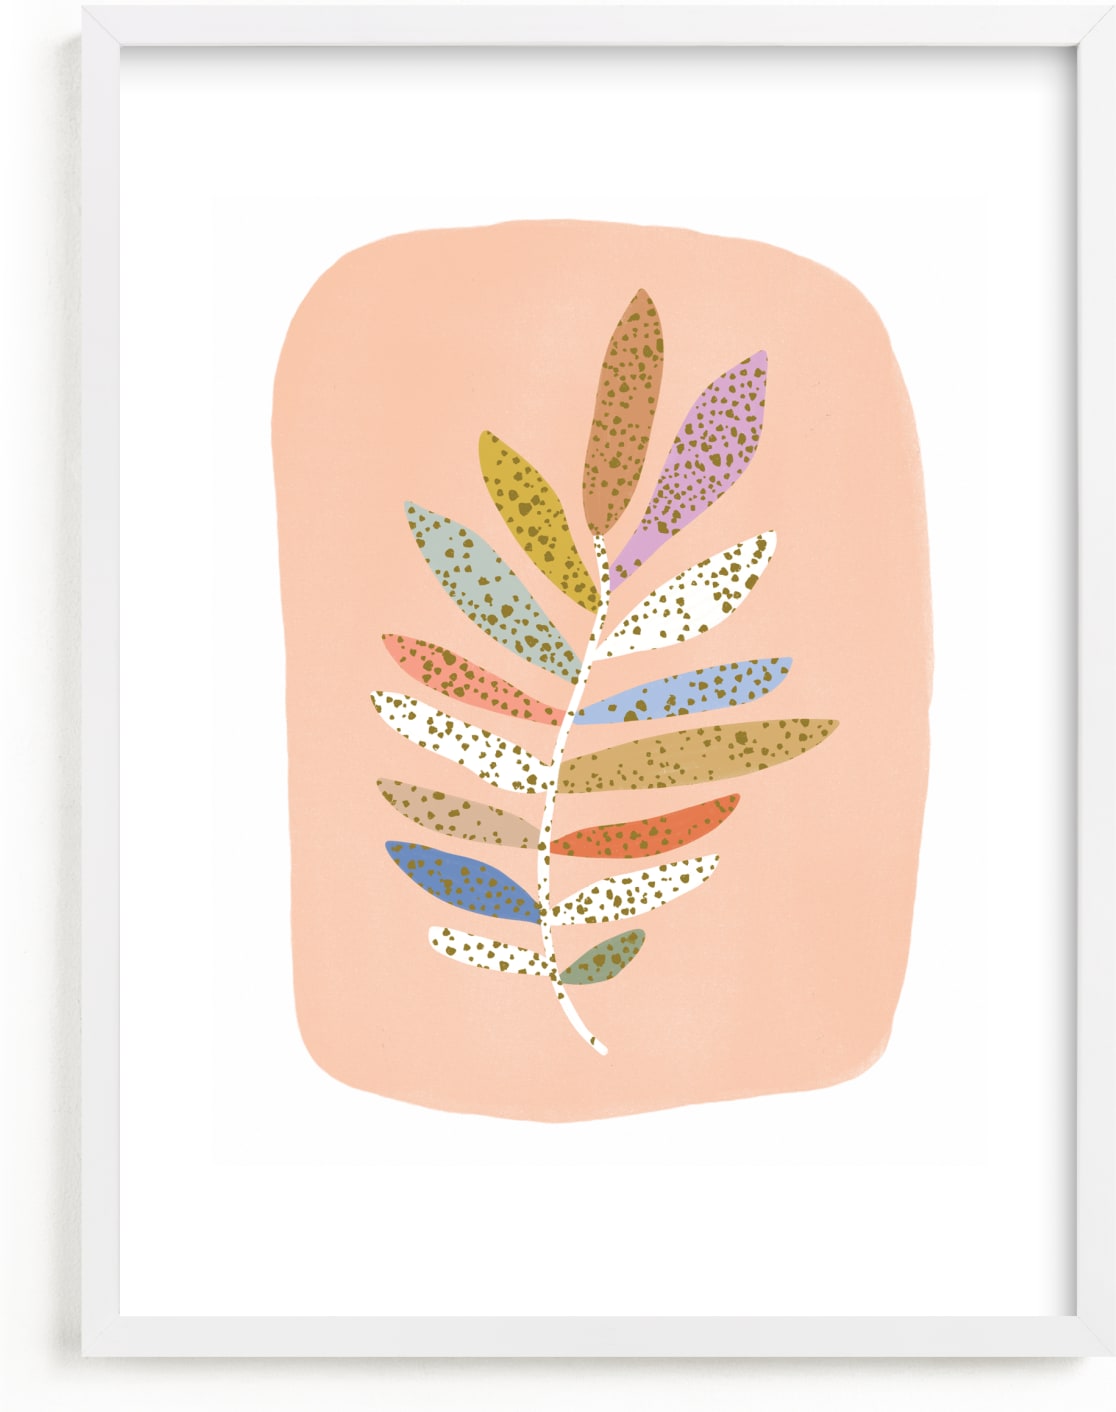 This is a colorful kids wall art by Kelly Ambrose called Speckled Branches.